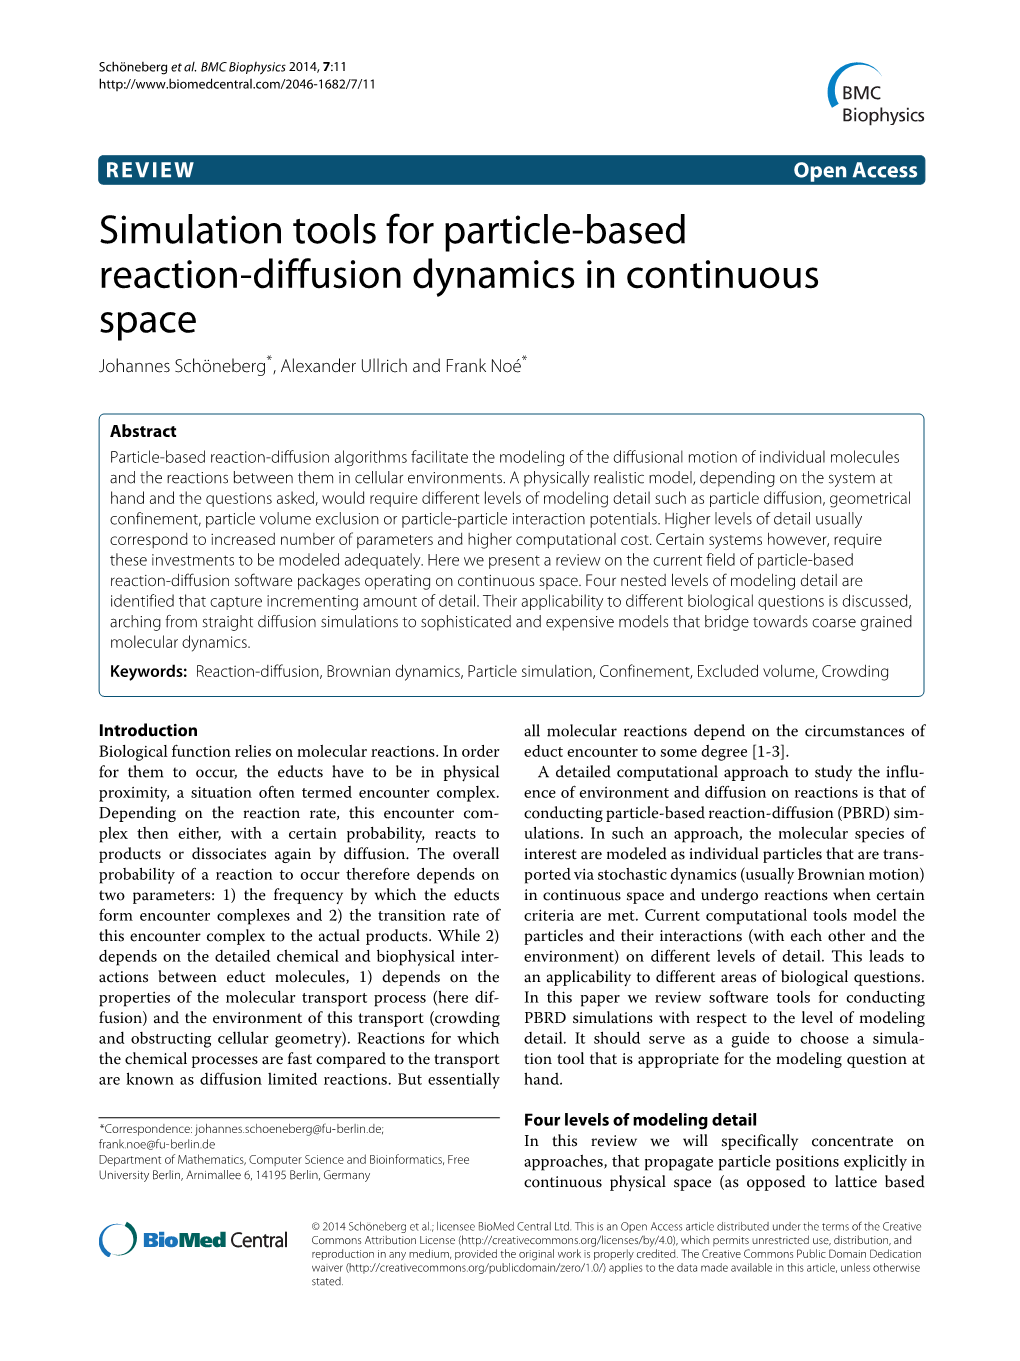 Simulation Tools for Particle-Based Reaction-Diffusion Dynamics in Continuous Space Johannes Schöneberg*, Alexander Ullrich and Frank Noé*